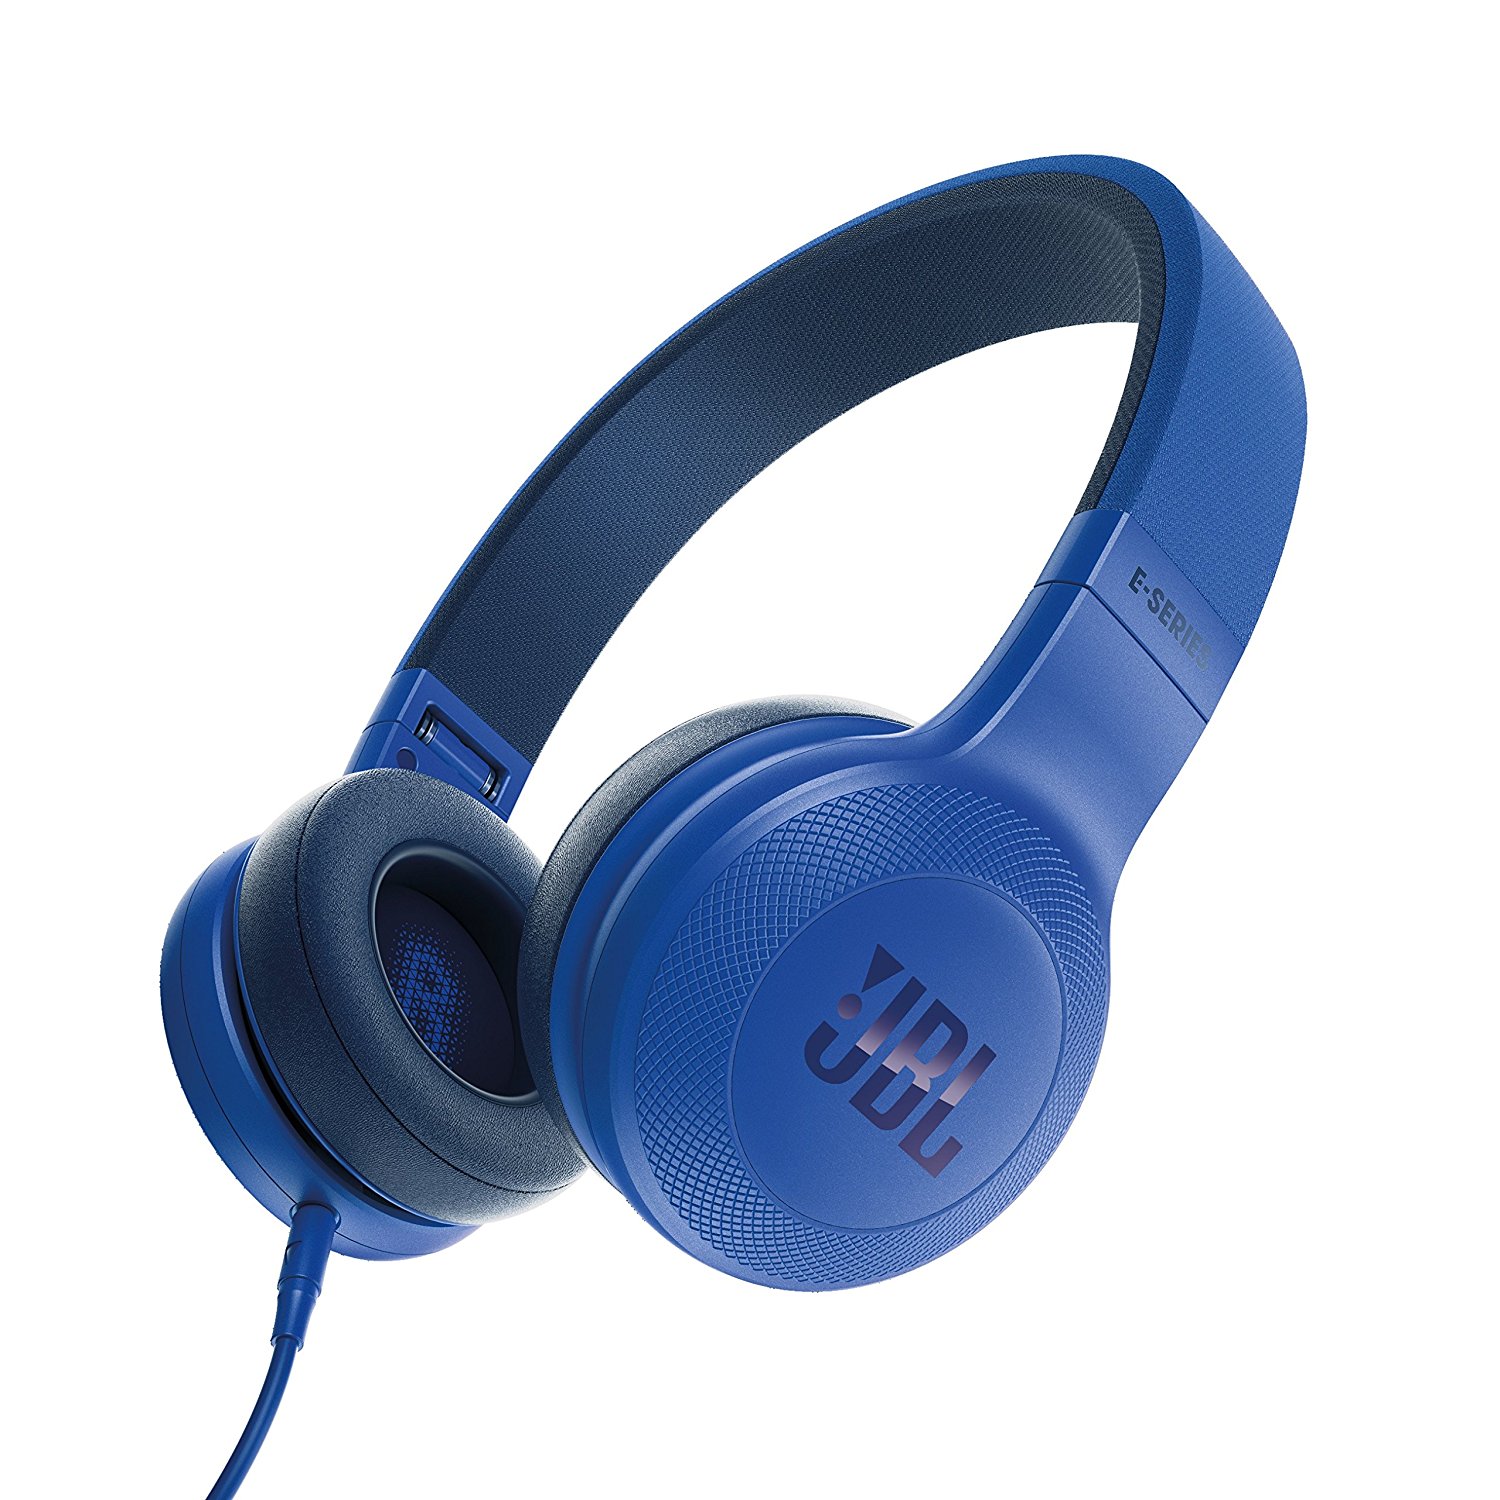 Amazon: Buy JBL E35 On-Ear Headphones with Mic at Rs 1799 only